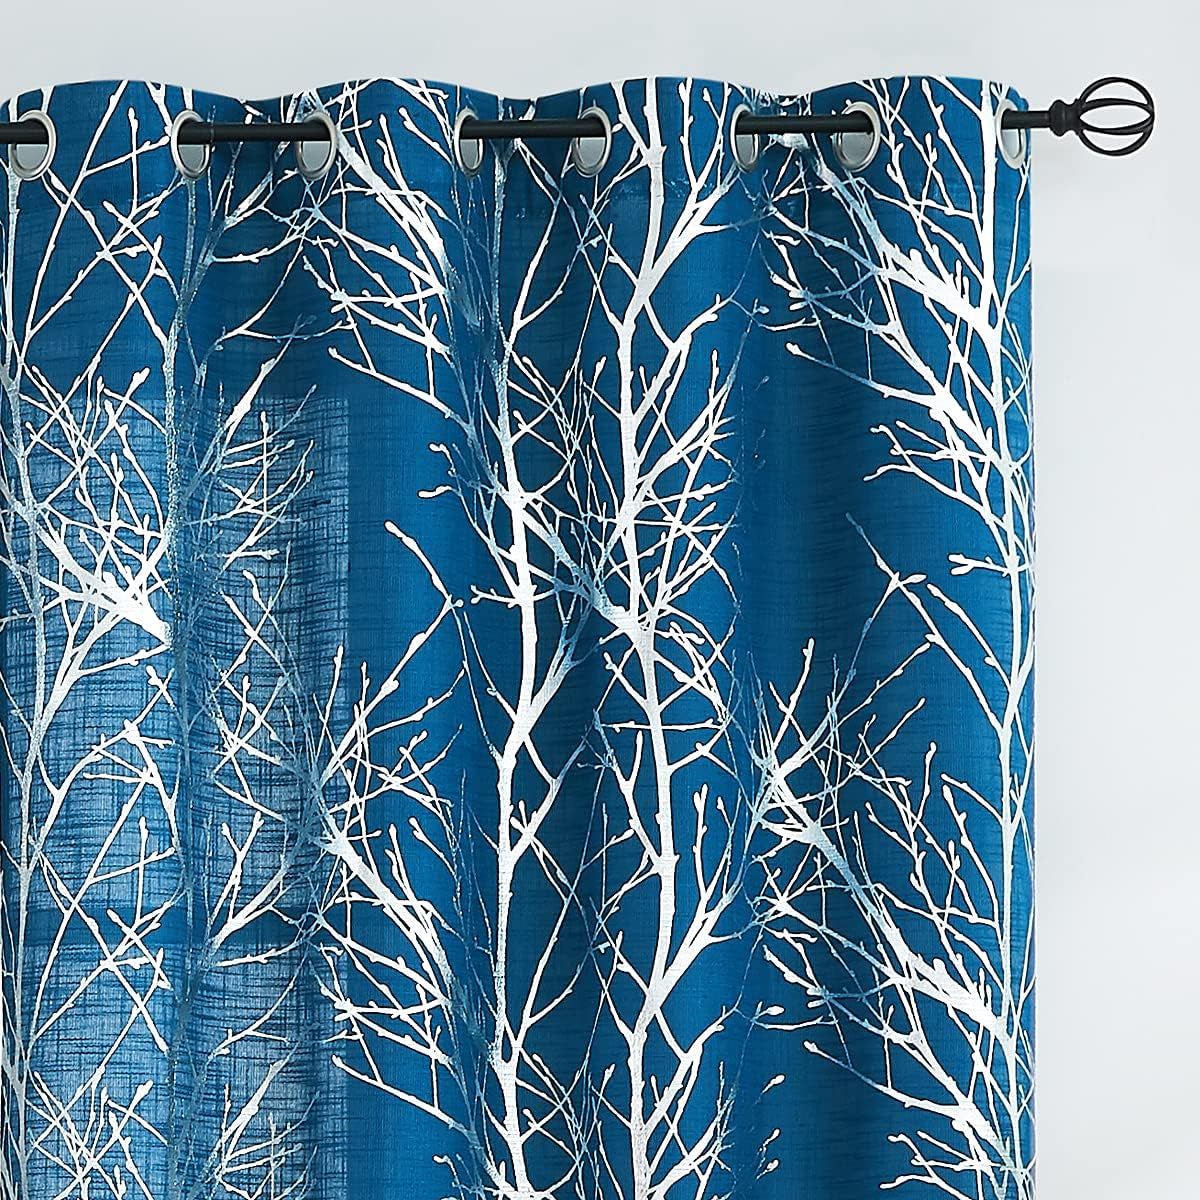 FMFUNCTEX Blue White Curtains for Kitchen Living Room 72“ Grey Tree Branches Print Curtain Set for Small Windows Linen Textured Semi-Sheer Drapes for Bedroom Grommet Top, 2 Panels  Fmfunctex Semi-Sheer: Navy + Foil Silver 50" X 96" |2Pcs 